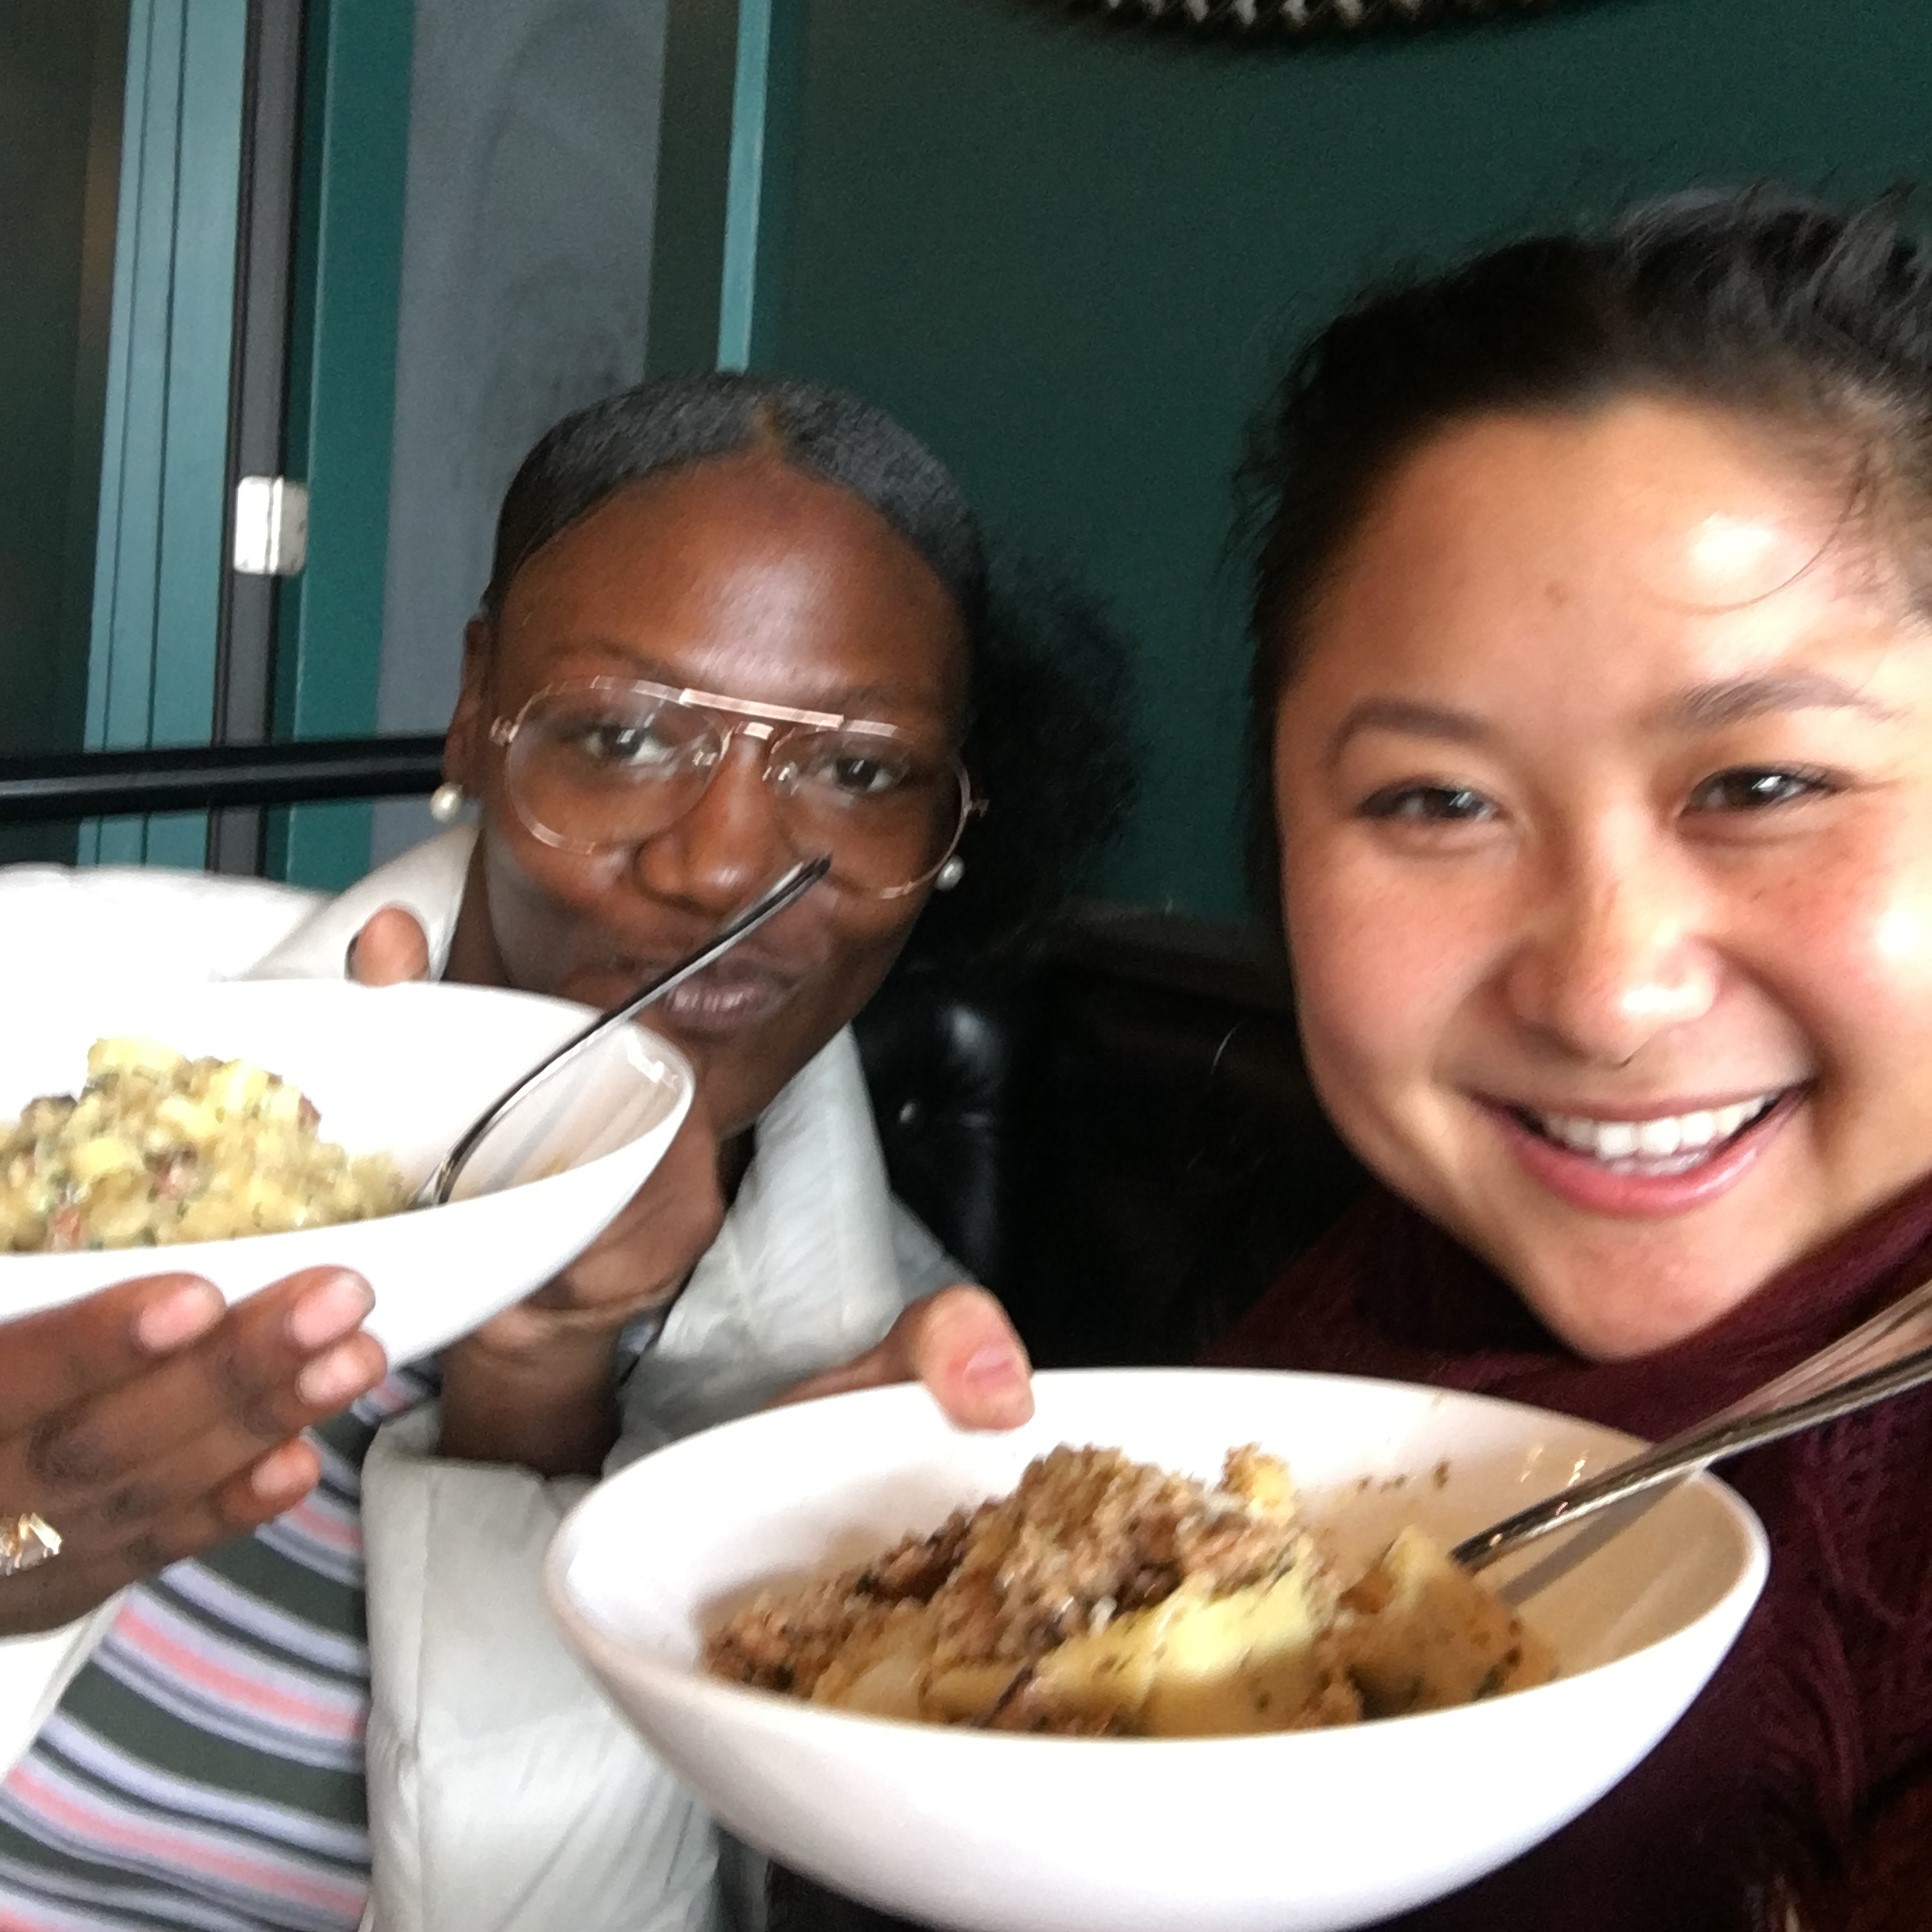 Brianna and Trang enjoy a delicious celebratory dinner together!